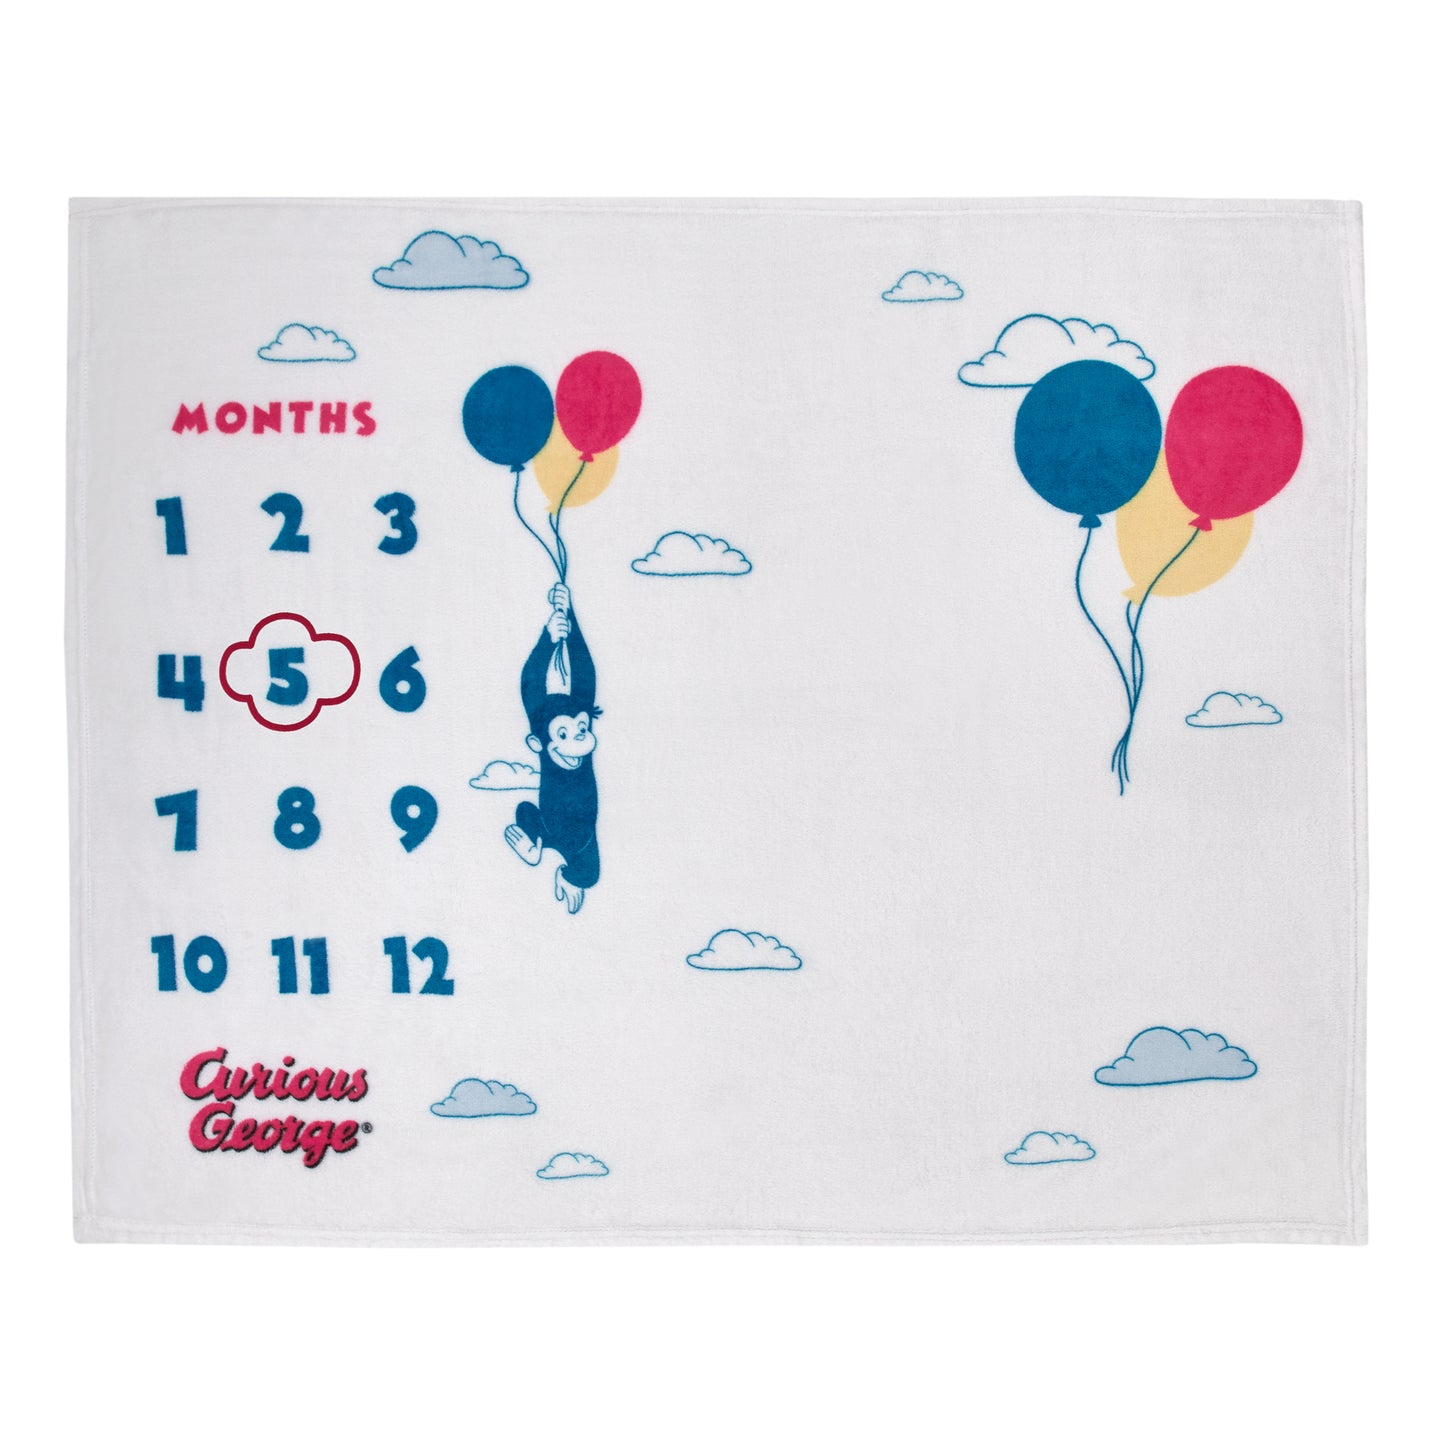 Welcome to the Universe Baby Curious George White, Blue, Red, and Yellow Balloons and Clouds Super Soft Milestone Baby Blanket